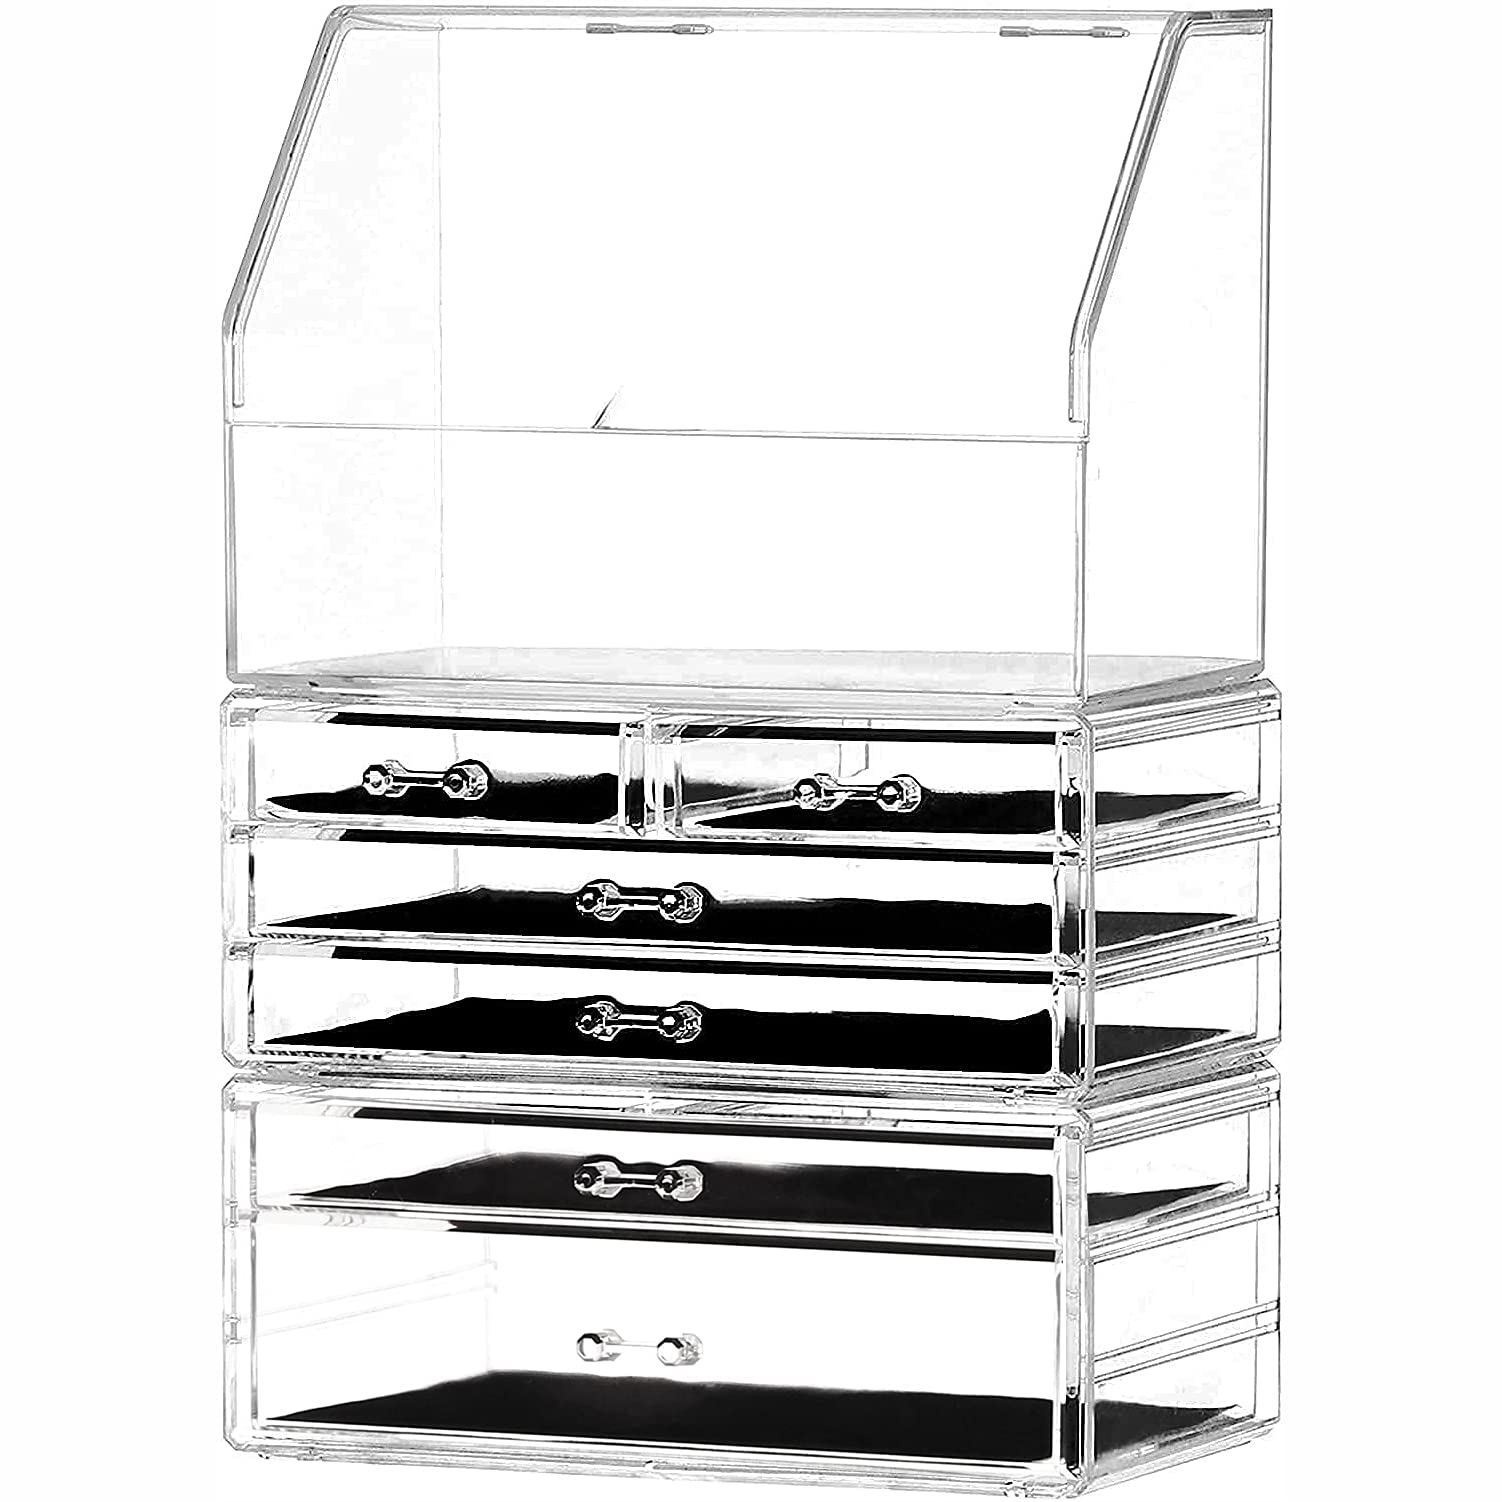 Cq acrylic Cosmetic Display Cases With LId Dust Water Proof for Bathroom Countertop Stackable Large Clear Makeup Organizer and Storage With 6 Drawers,Set of 3